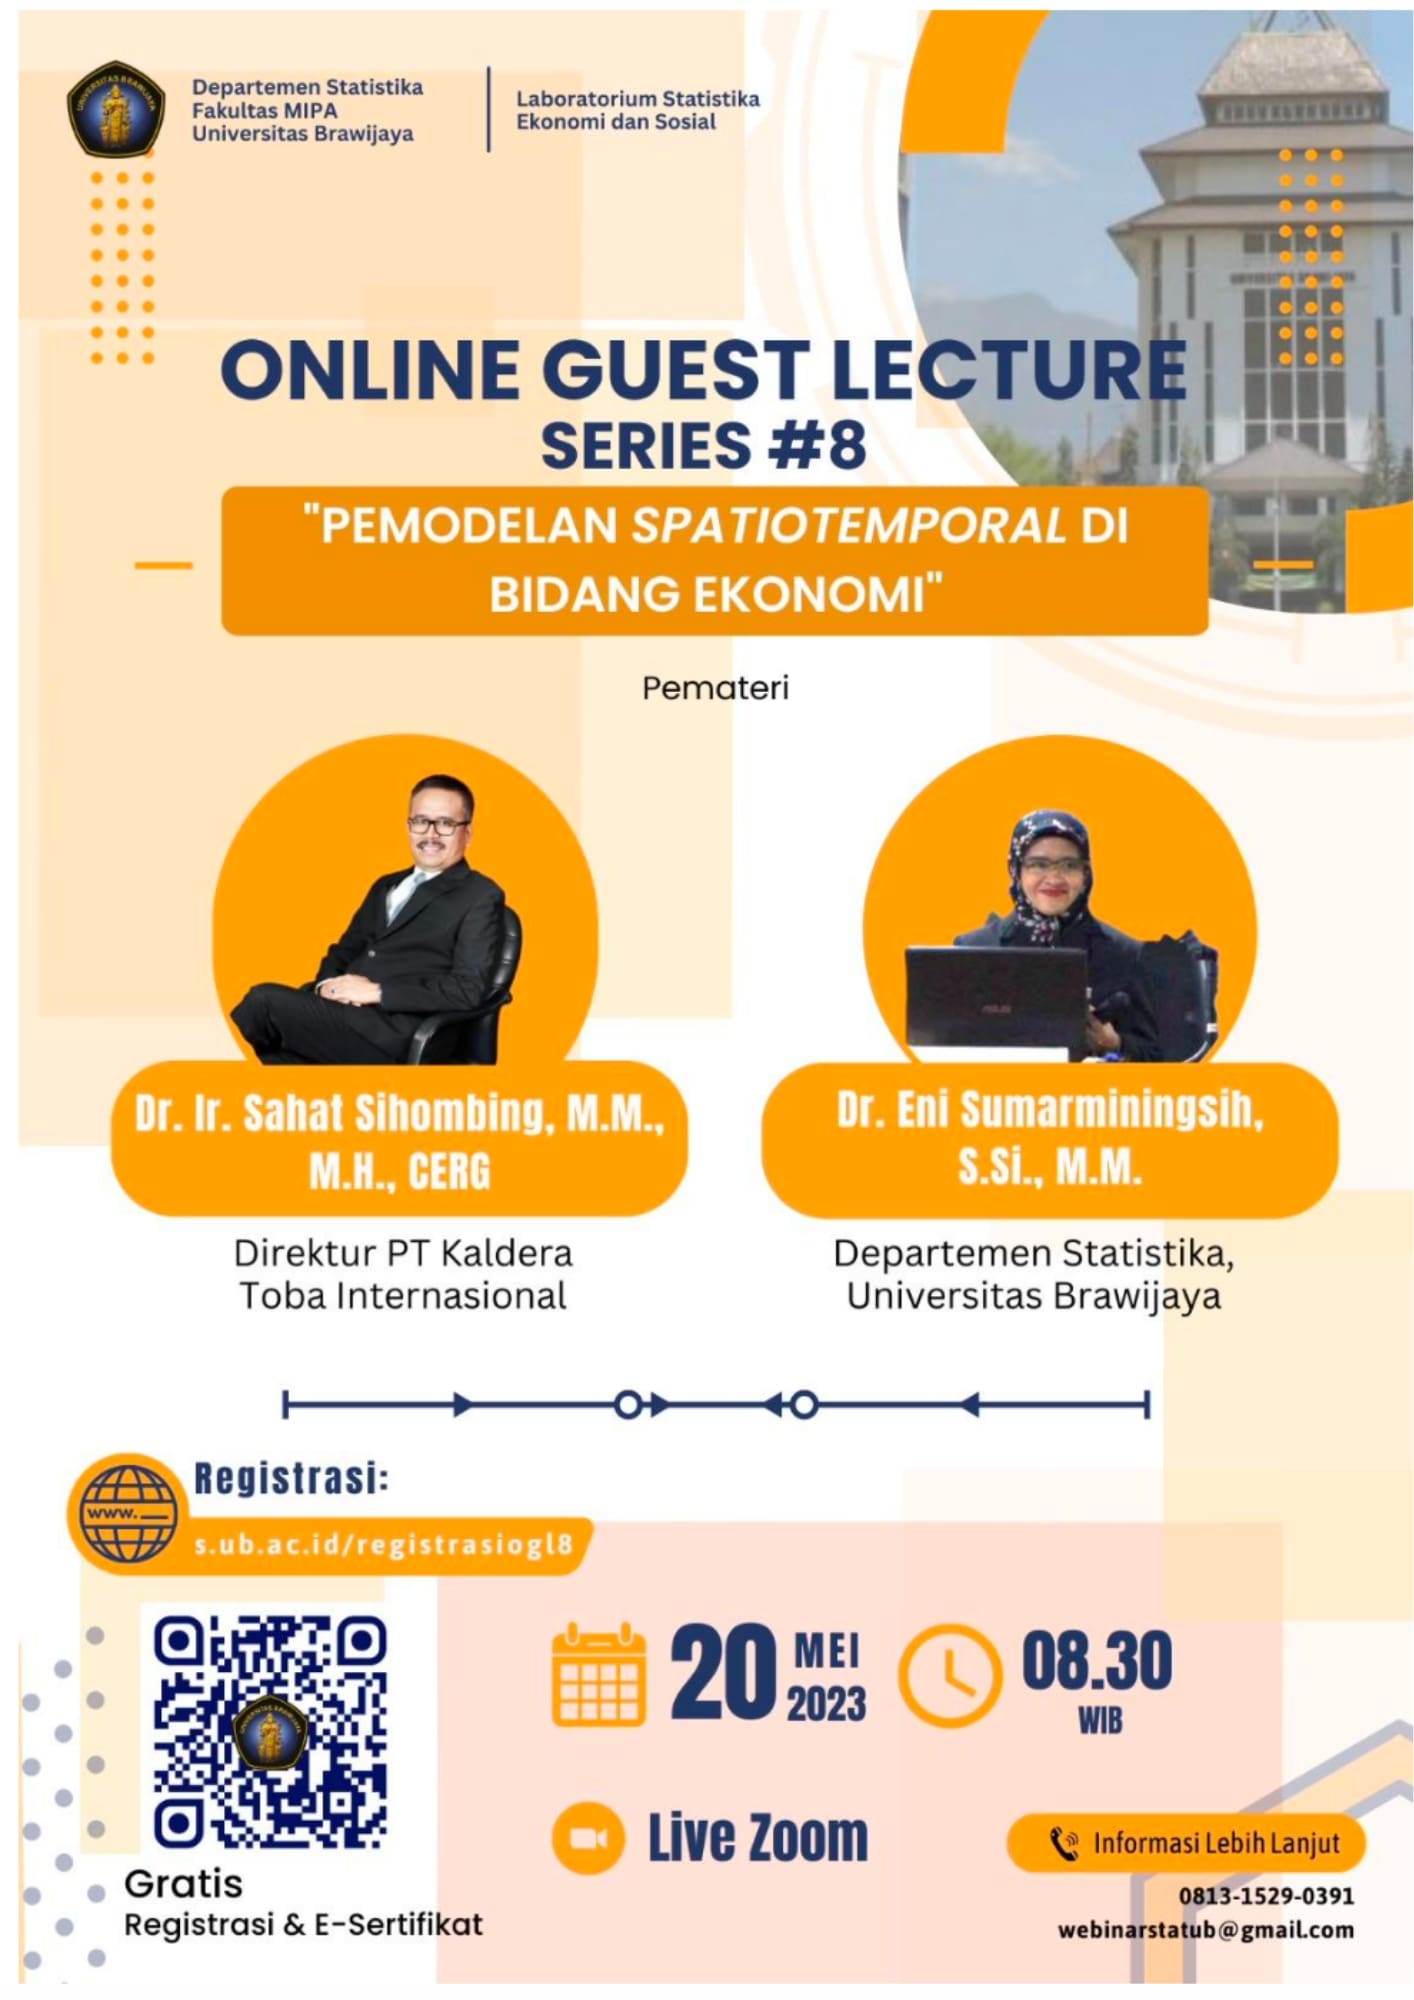 Online Guest Lecture (OGL) #8 Series